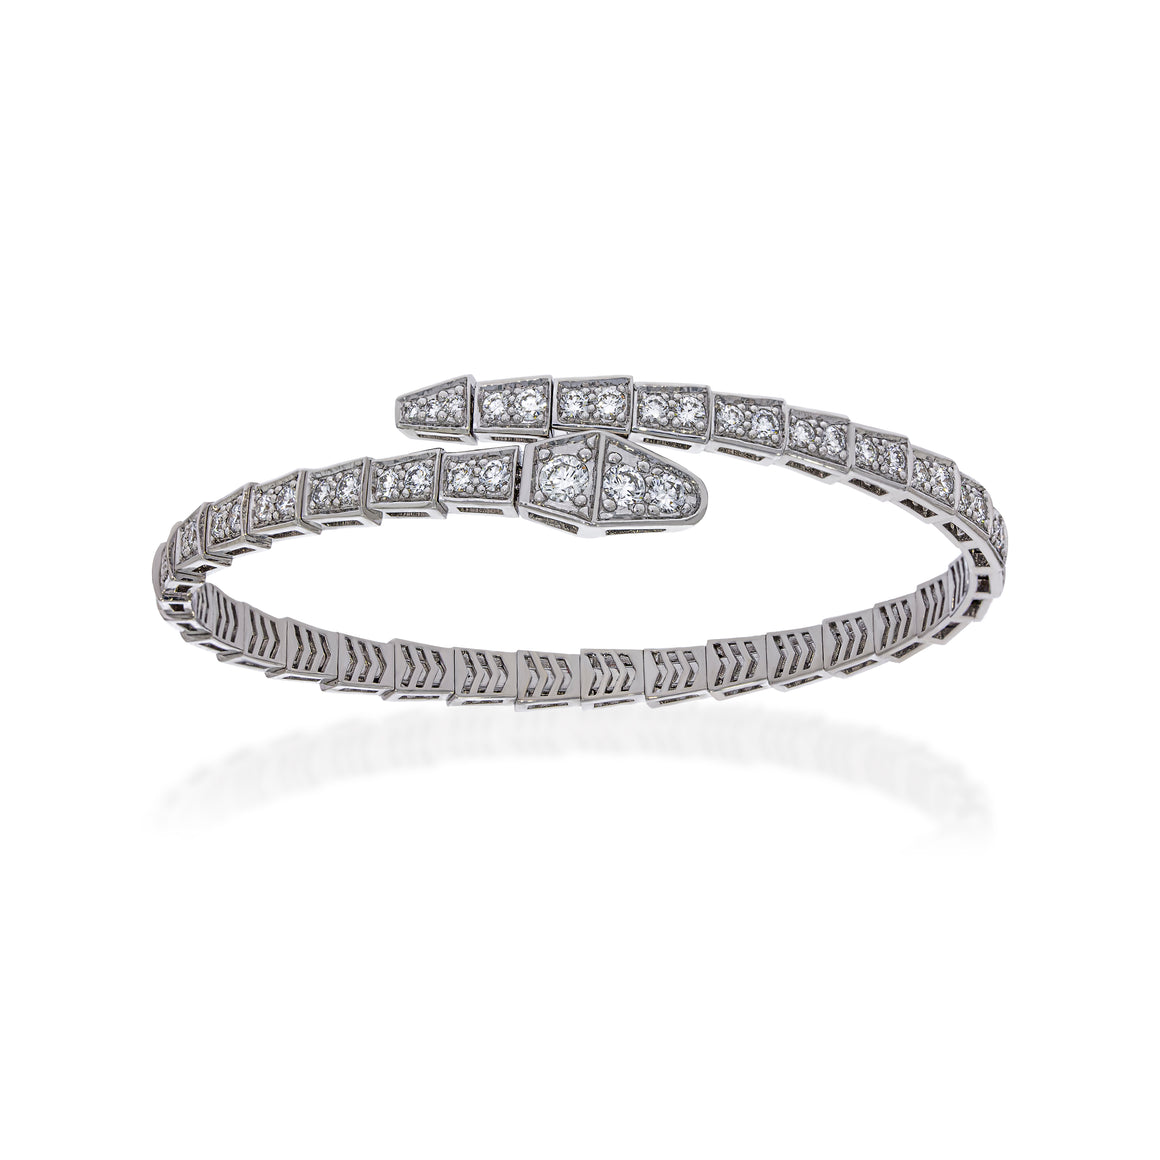 18K white gold, snake-shaped link bracelet, set with 74 round brilliant diamonds, 3.00ct. Suitable for both man and woman.